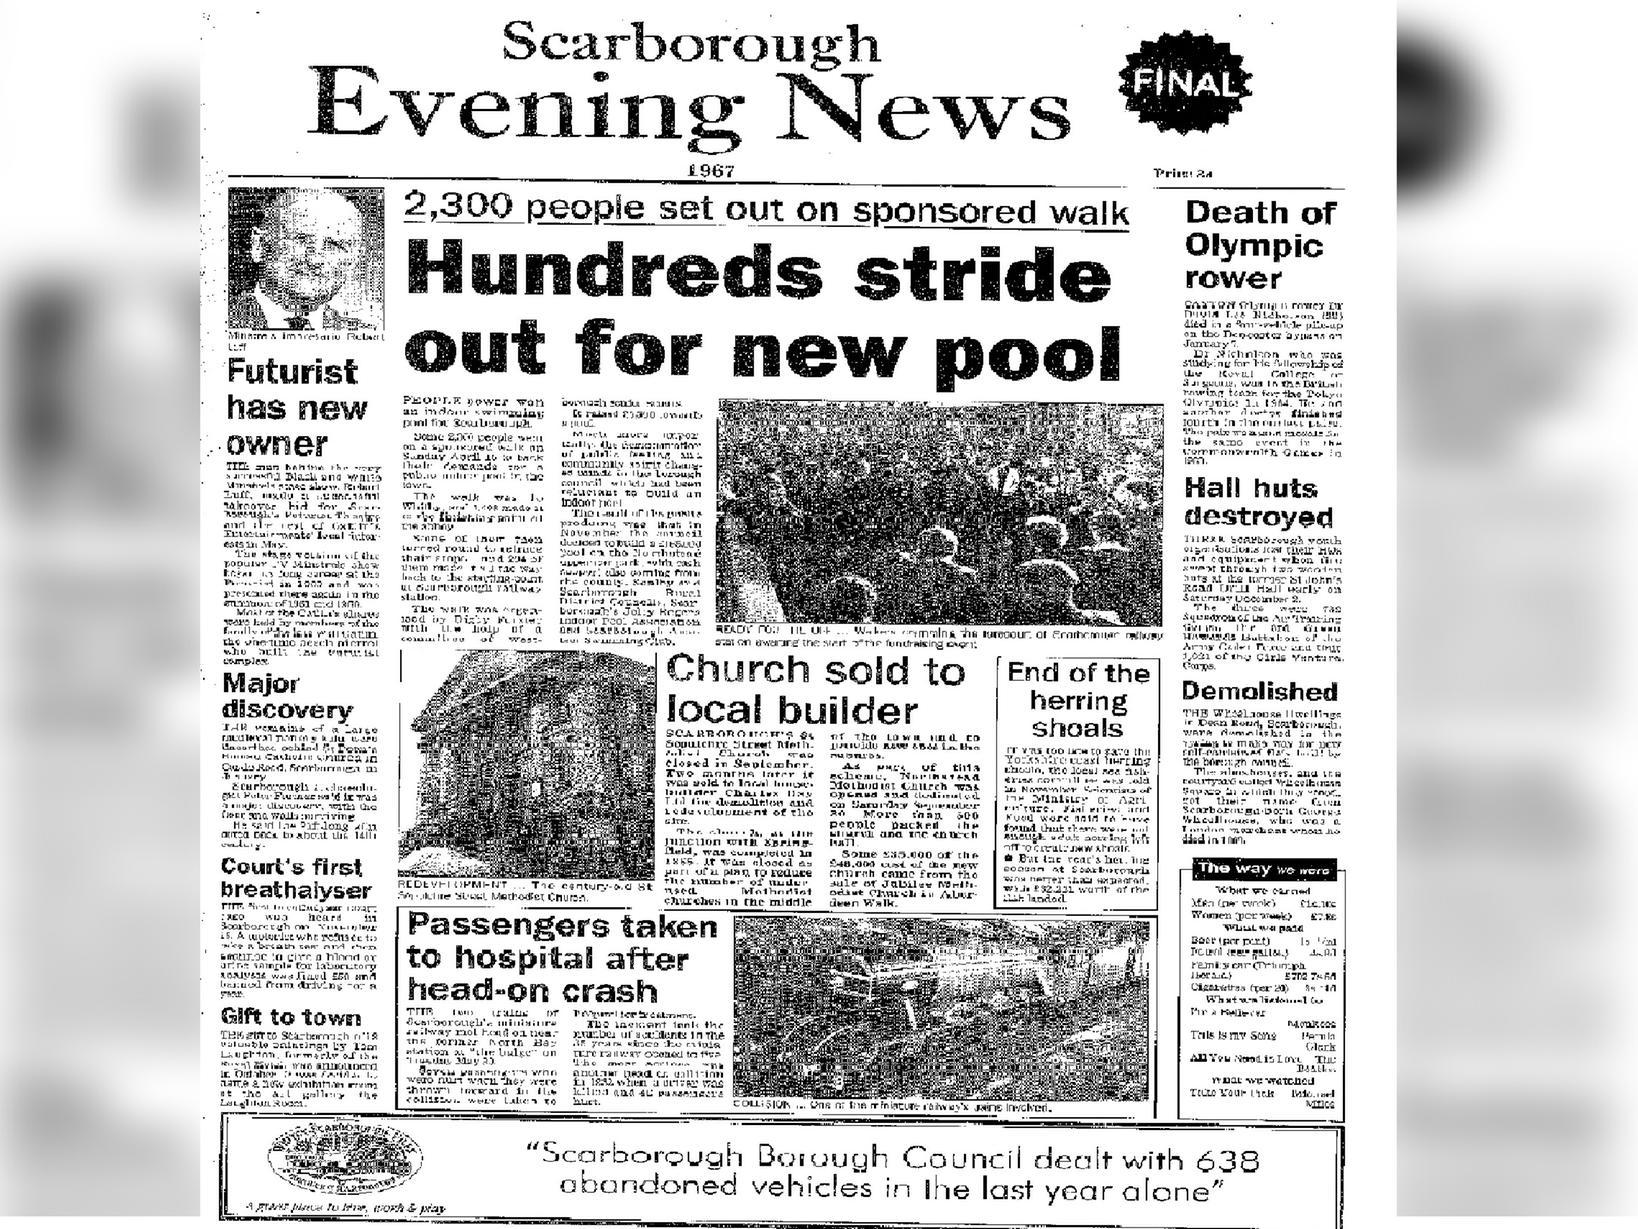 This 1967 year review features a sponsored walk attended by more than 2,300 people asking for a public indoor pool to be built.